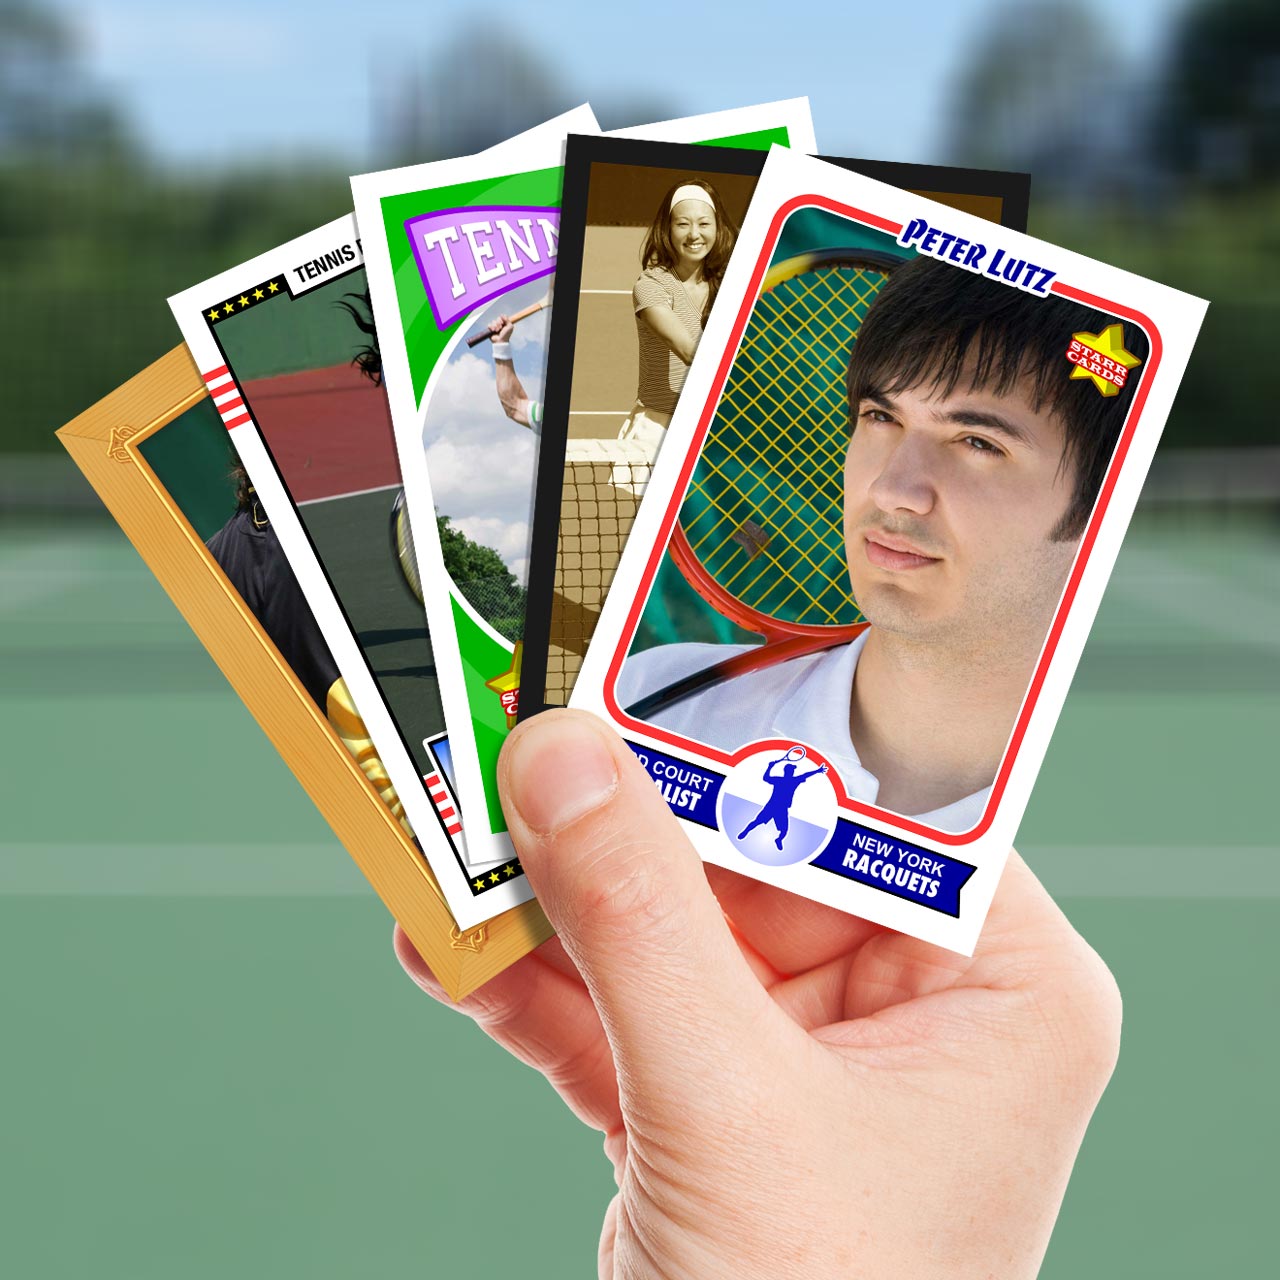 Make your own tennis card with Starr Cards.